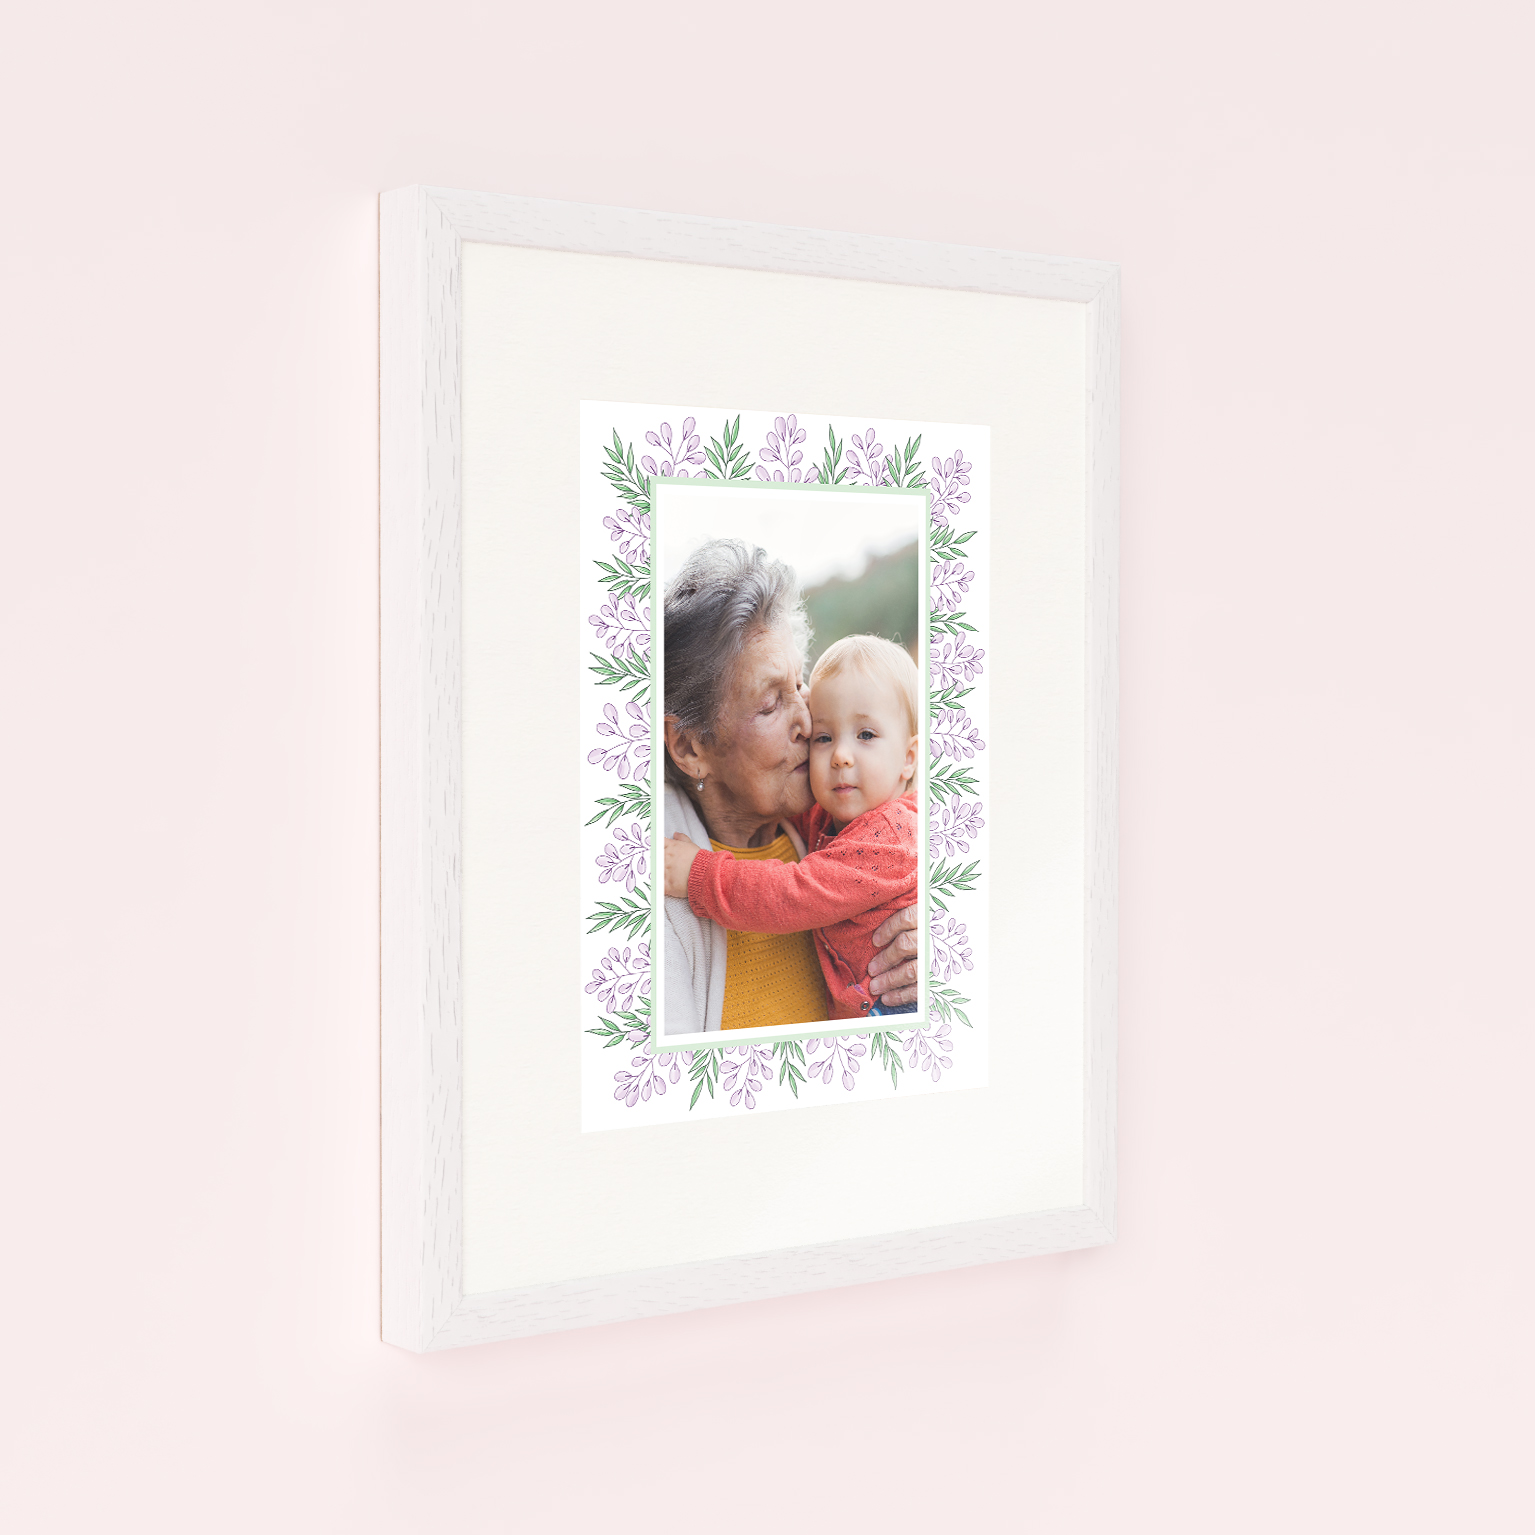 Photo of a framed photo print called 'Floral Memories'. It is 40cm x 30cm in size, in a Portrait orientation. It has space for 1 photos.